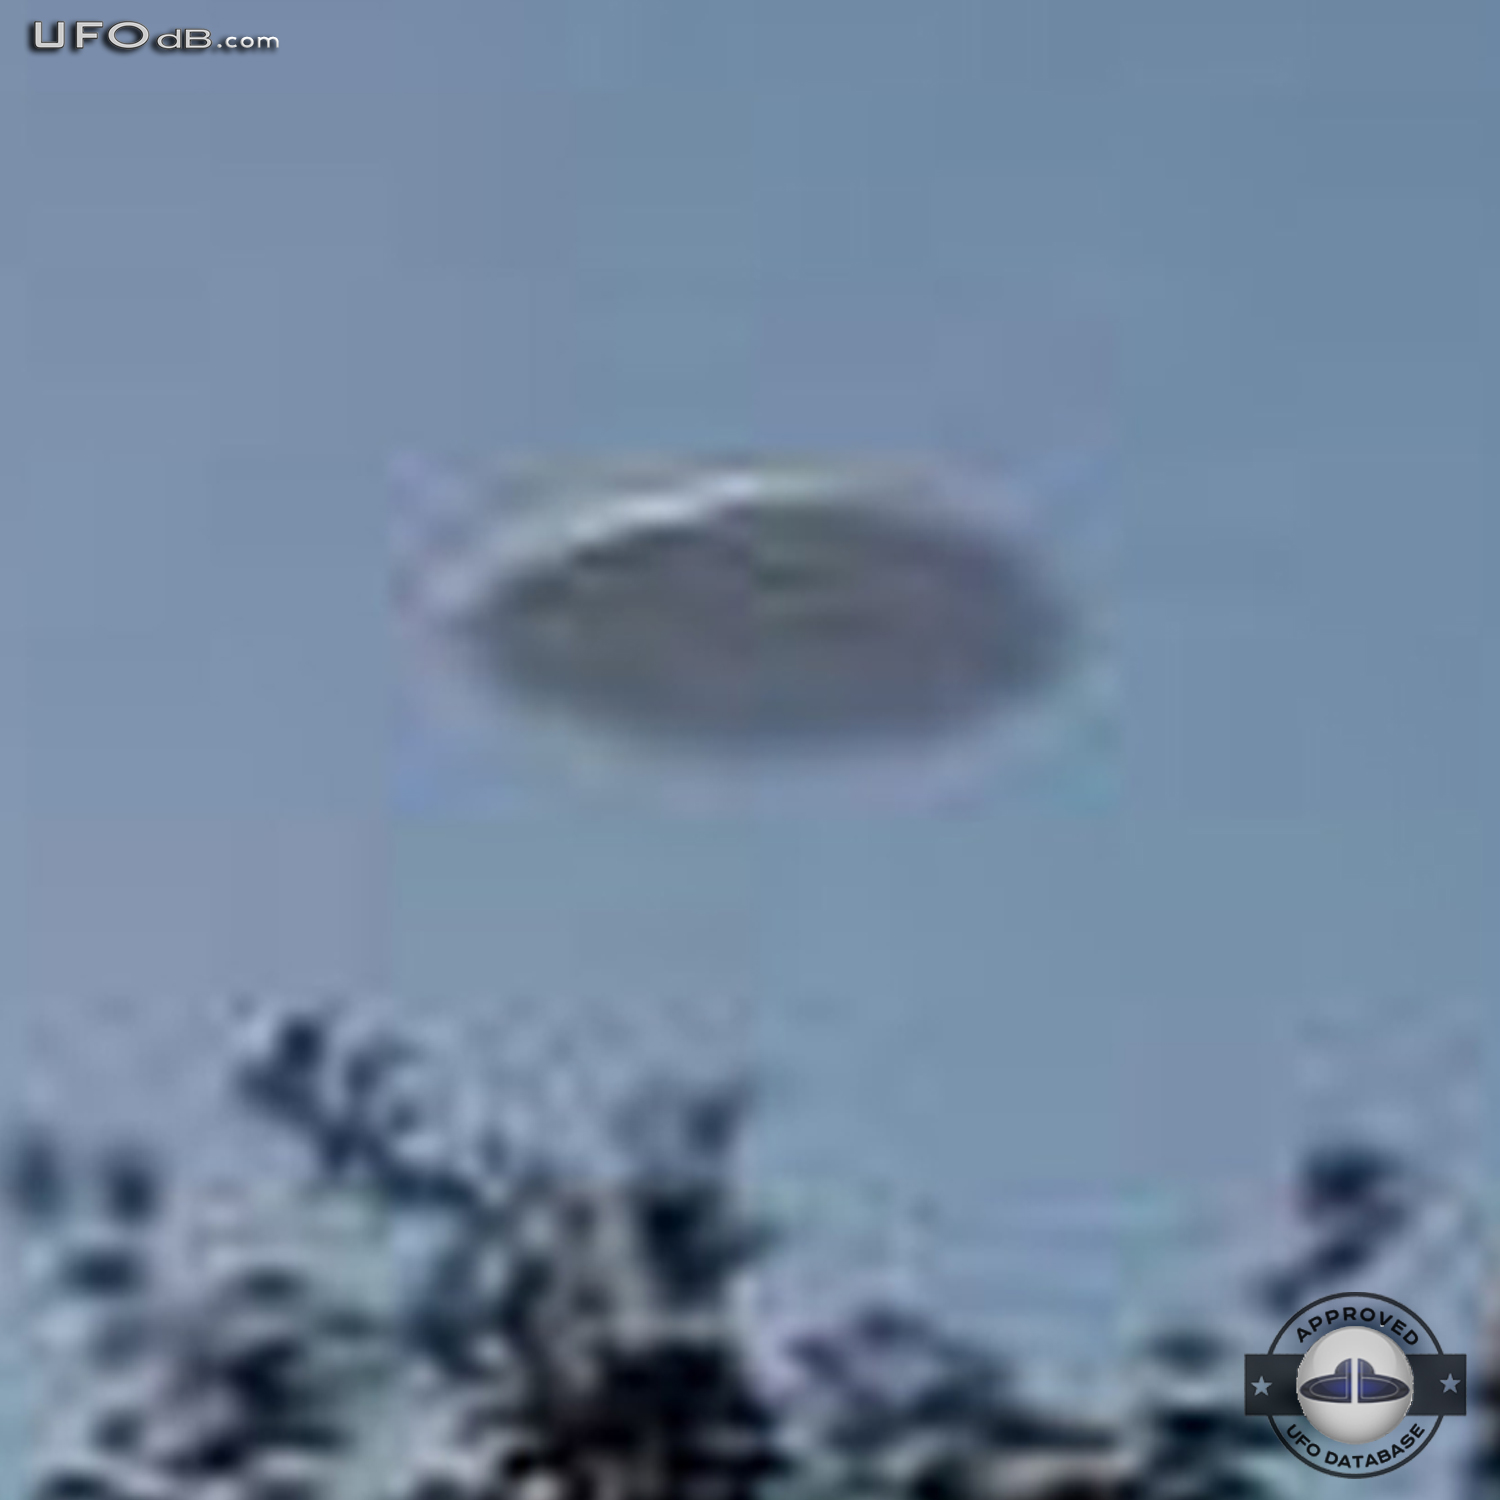 In Vestal New York a witness sees a UFO as large as a Football Stadium UFO Picture #363-3